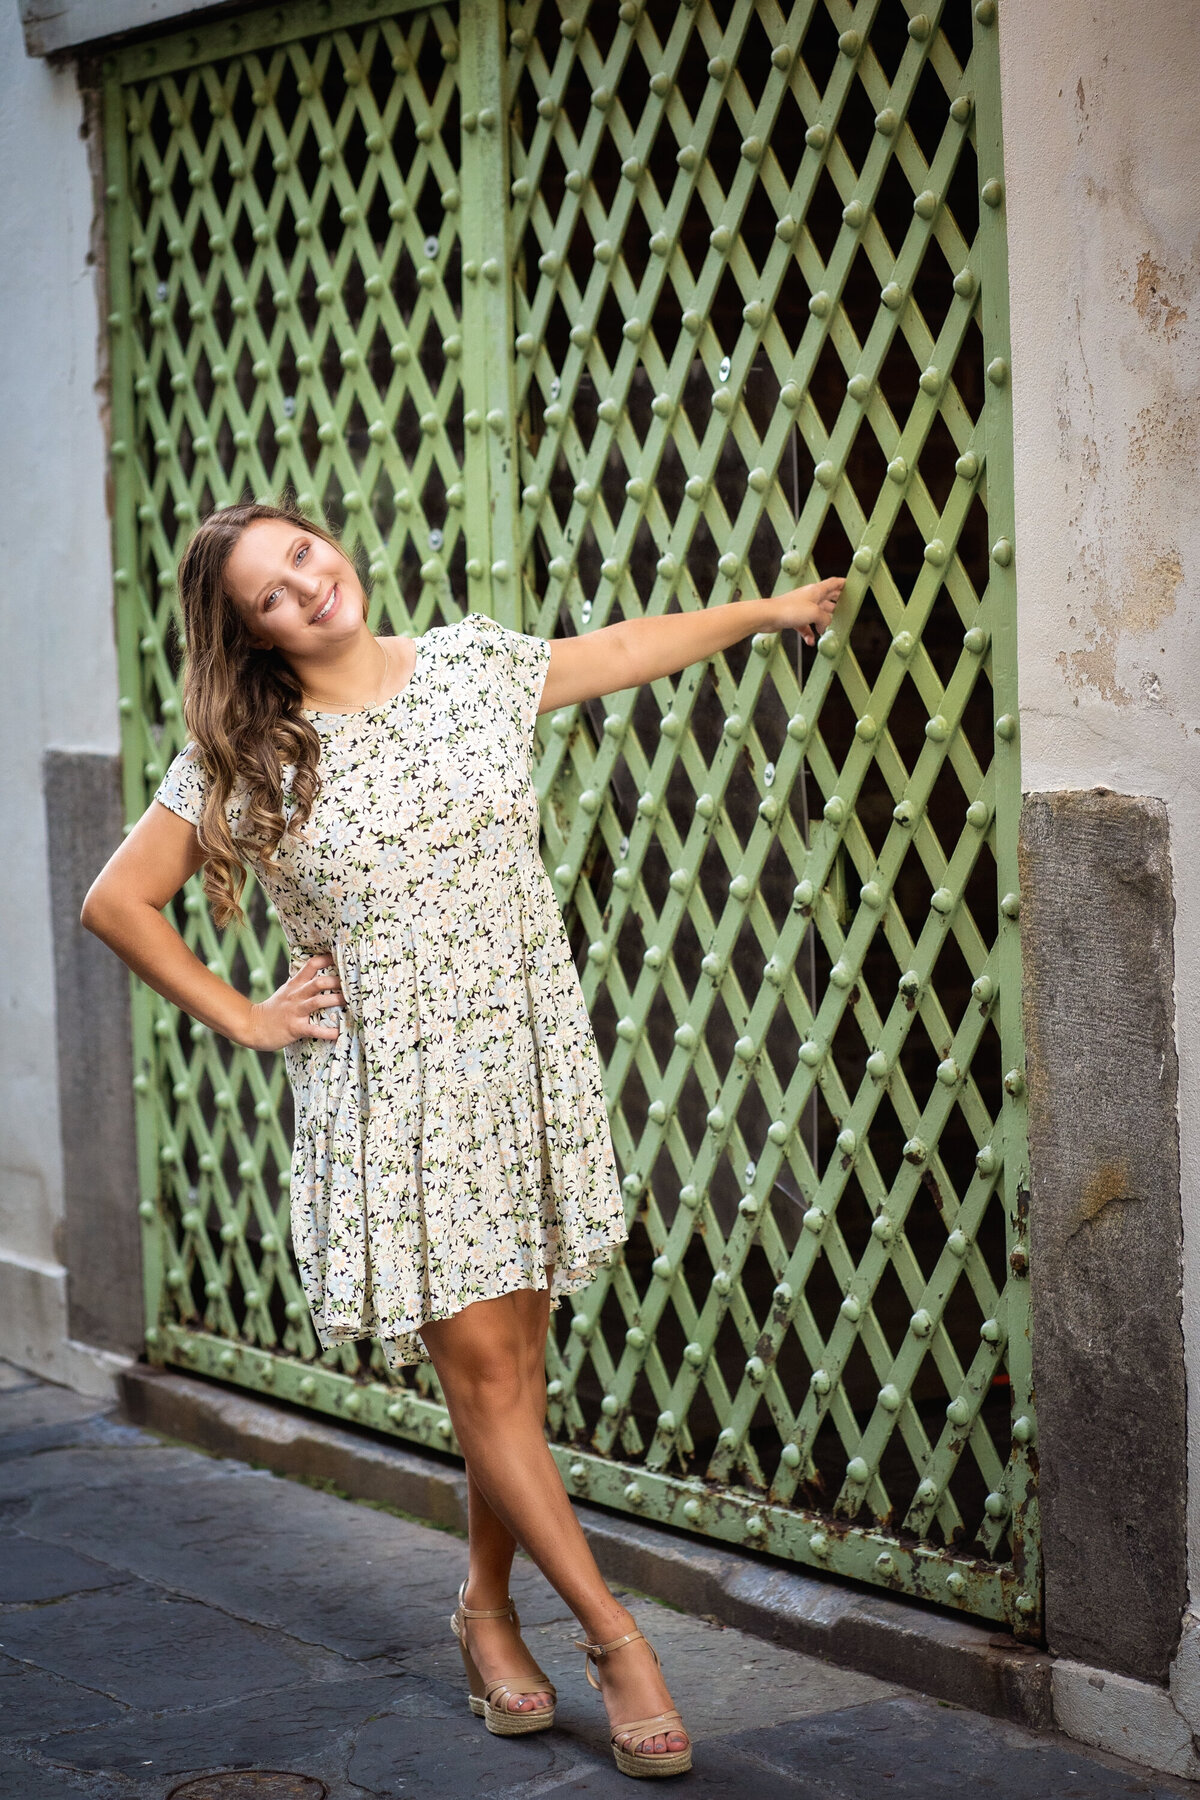 Senior high school girl in a floral patterned dress holding onto a green metal door.  She is wearing nude high heels and smiling at the camera with one hand on her waist.  She has long light brown wavy hair.